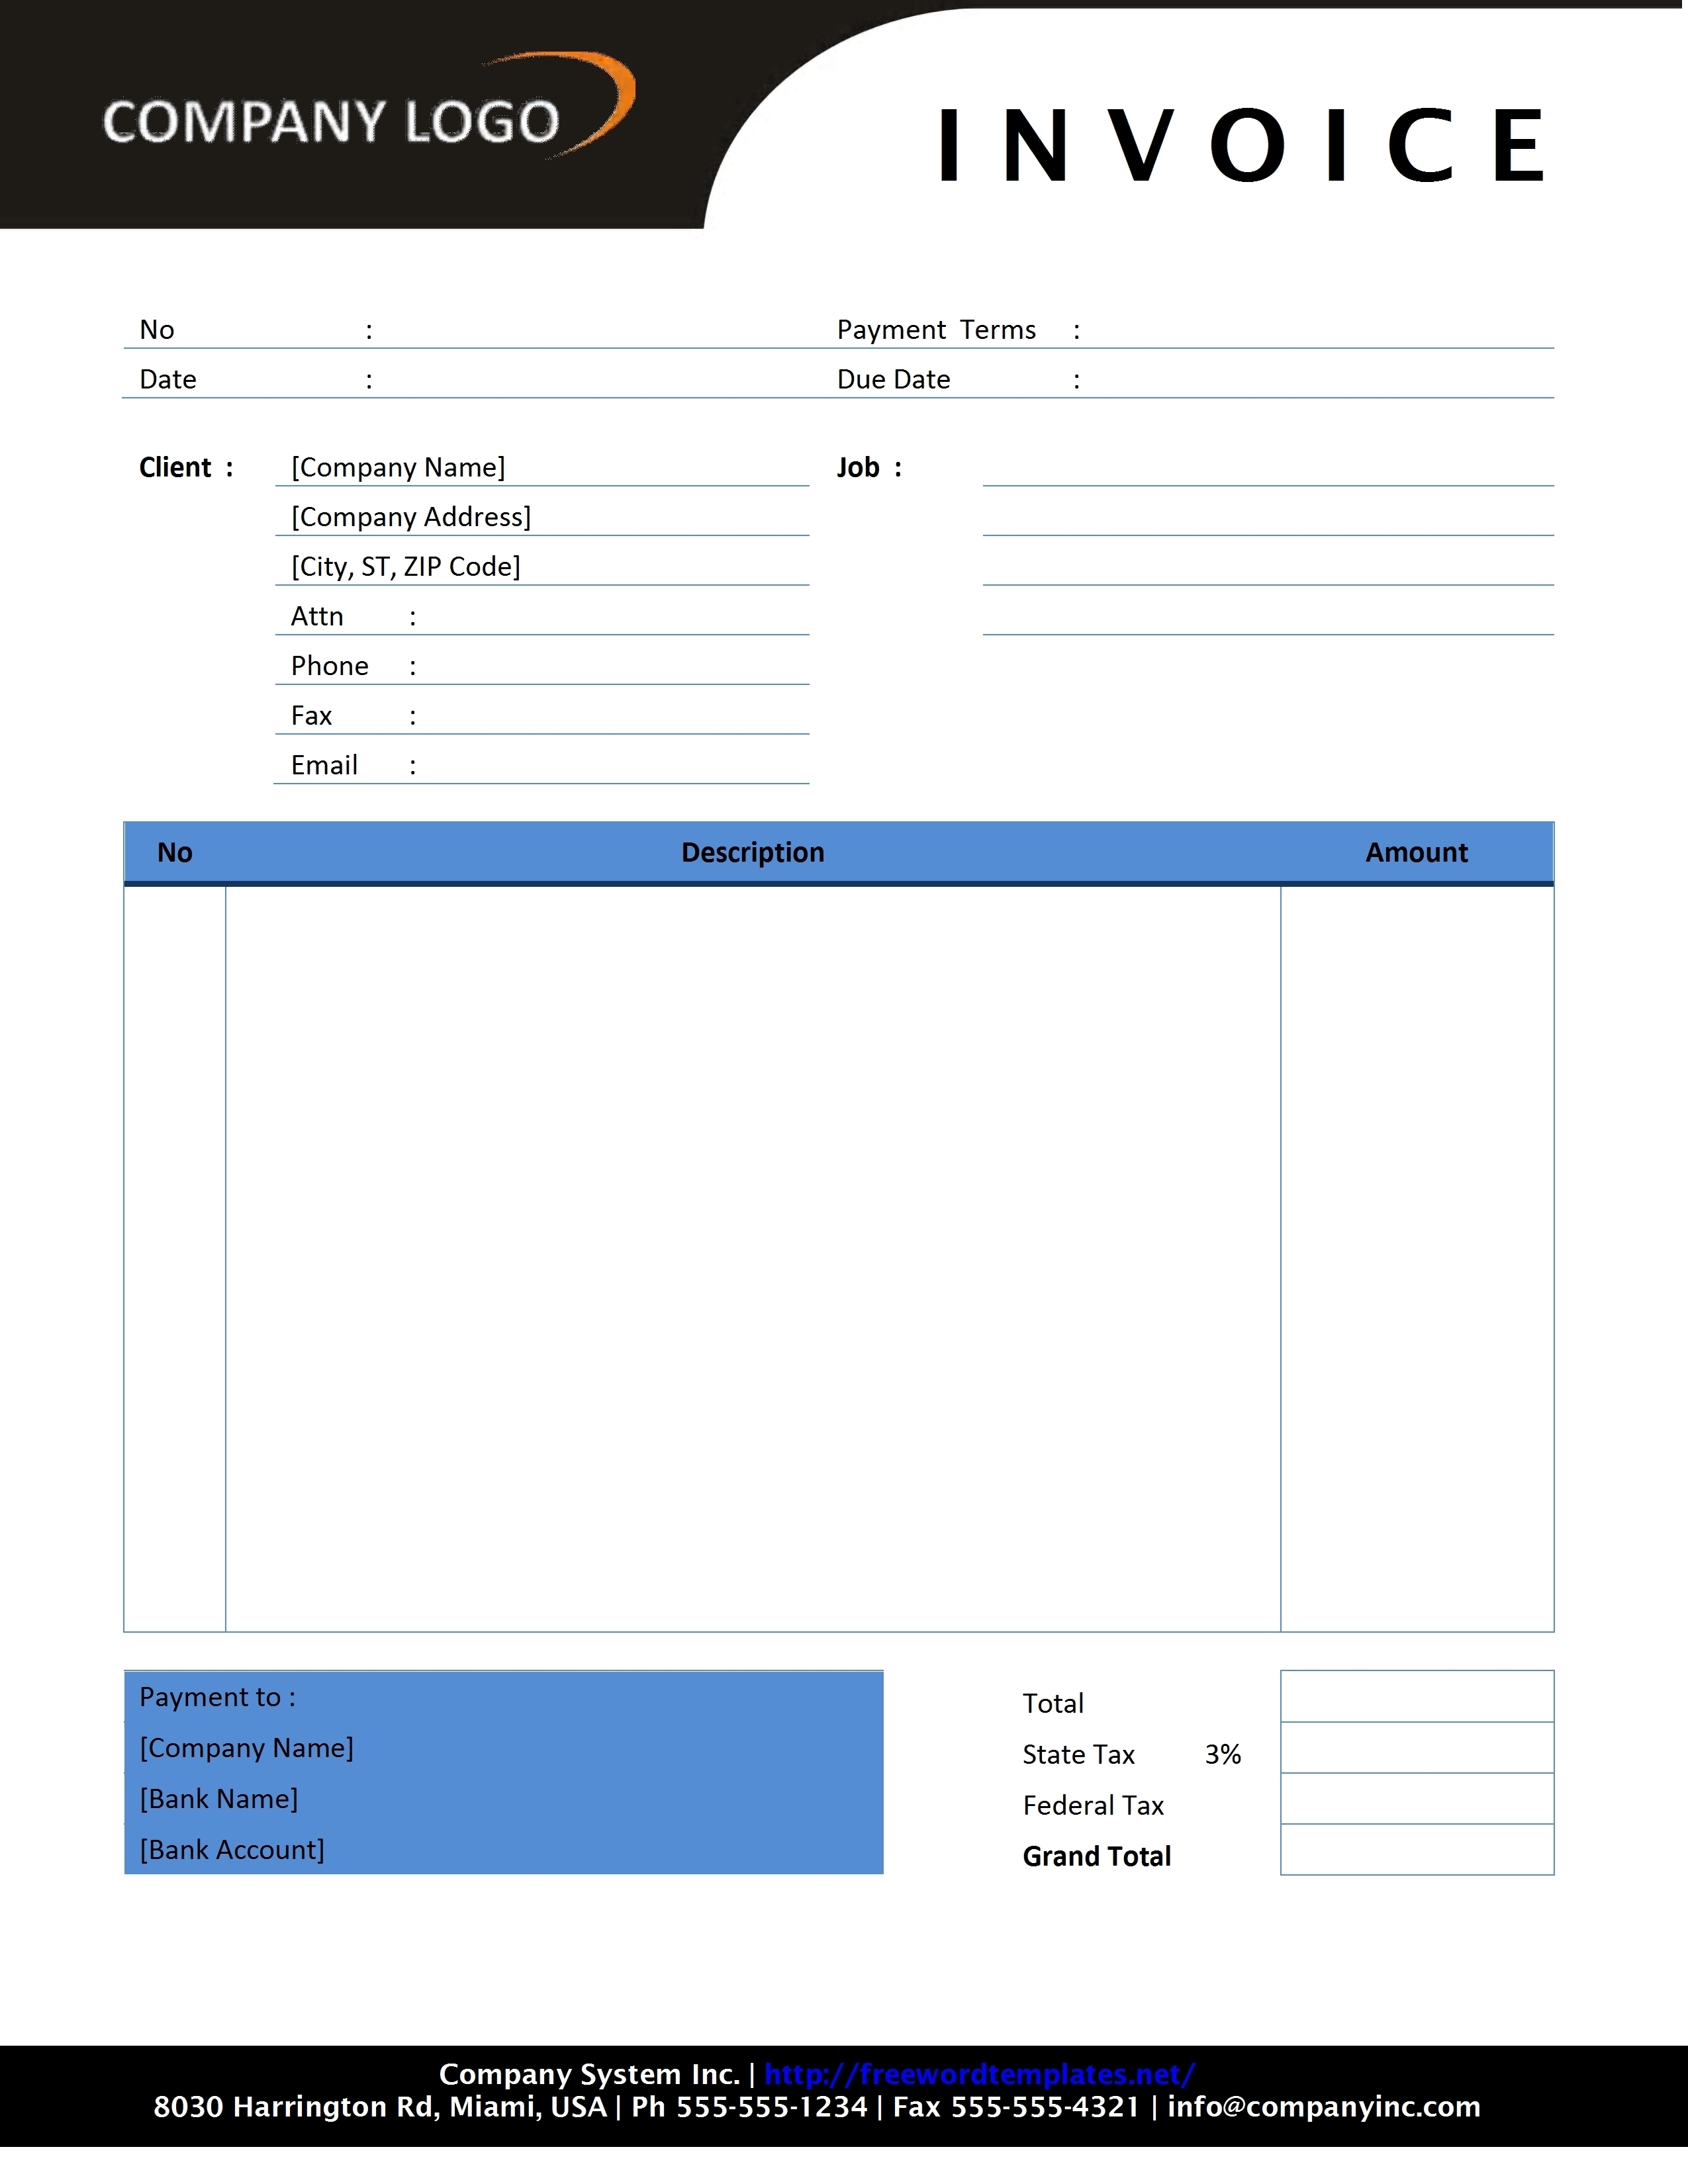 create a simple invoice in word